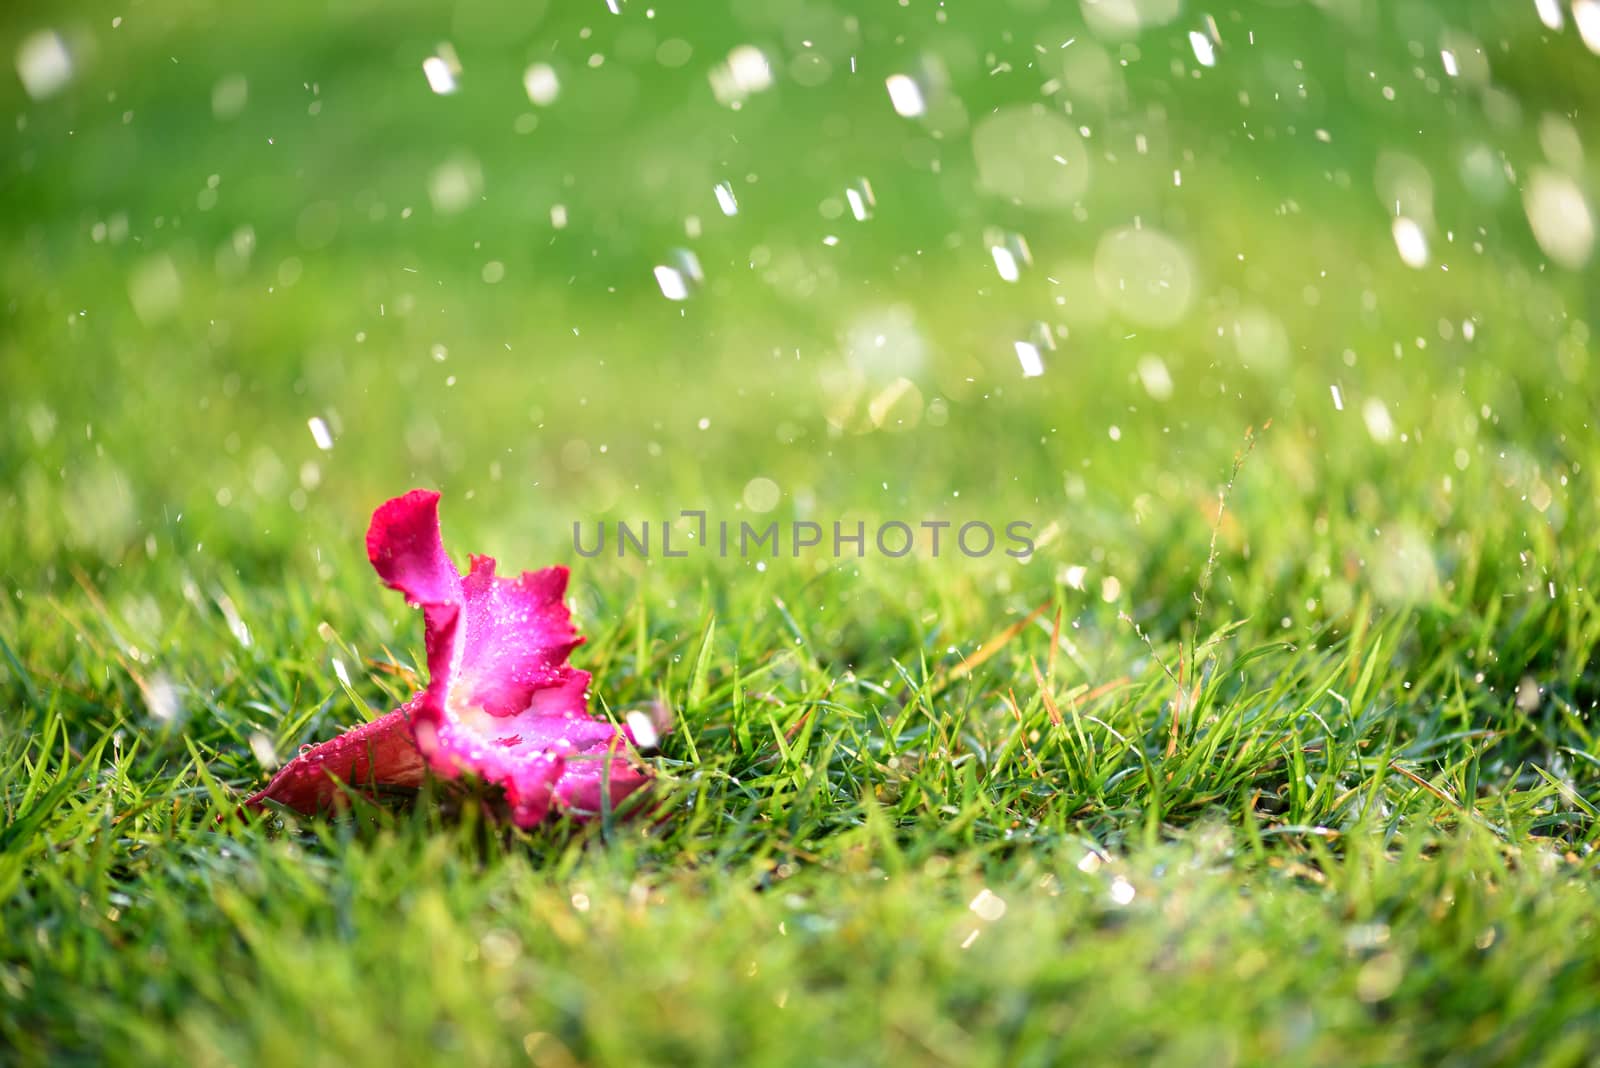 Soft focus of Close up on alone Pink flower with heavy raining o by spukkato